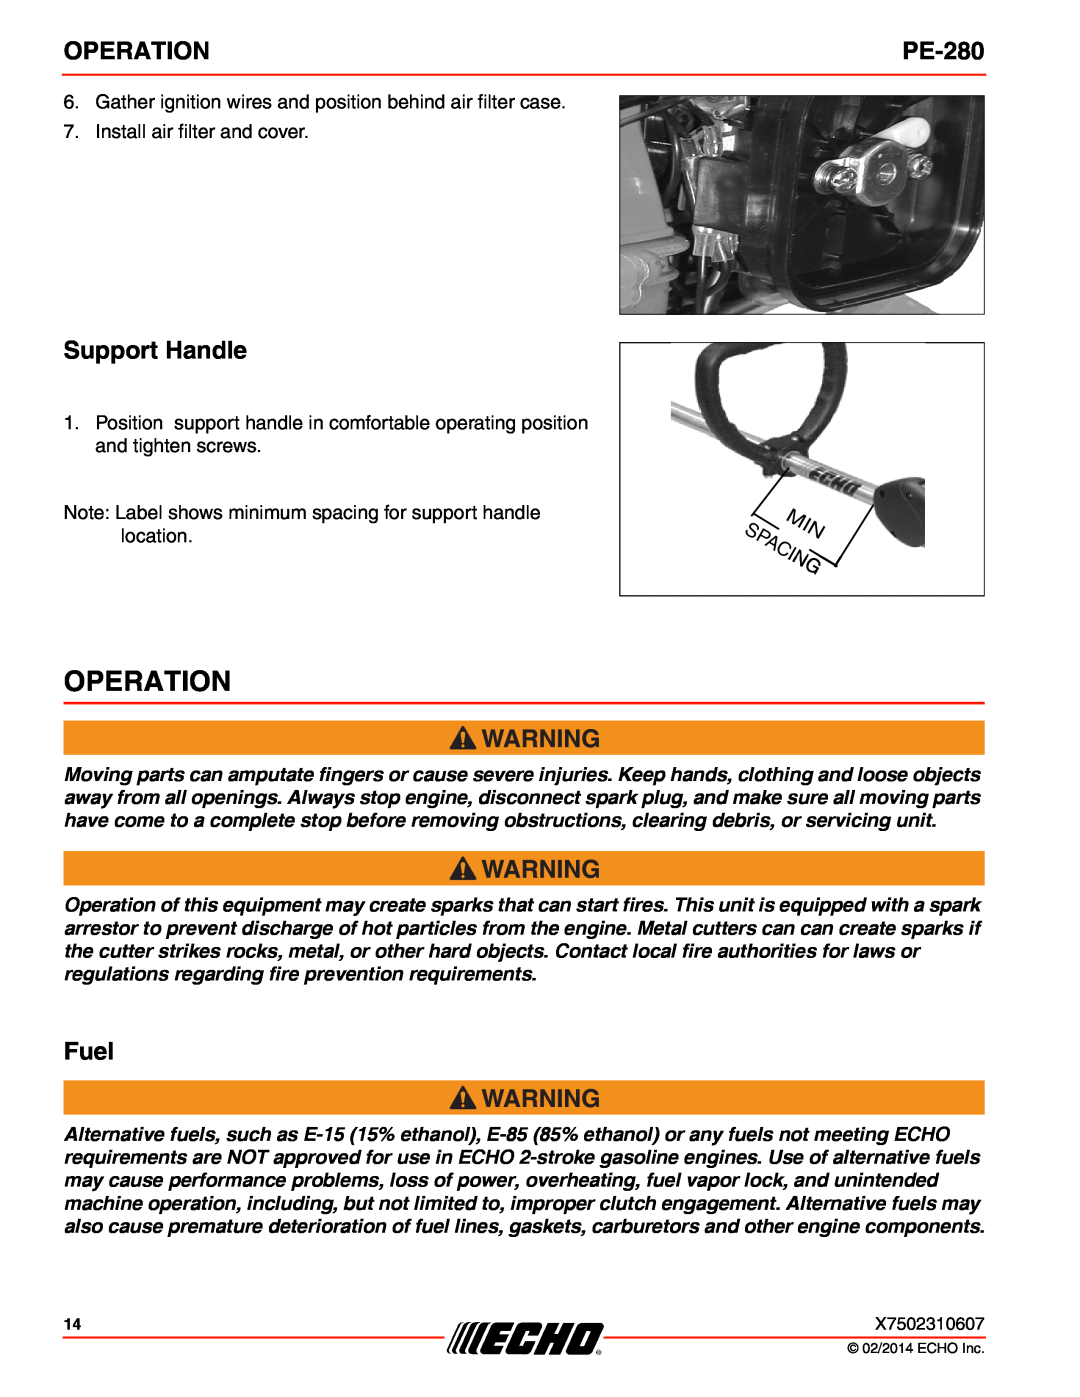 Echo PE-280 specifications Operation, Support Handle, Fuel 